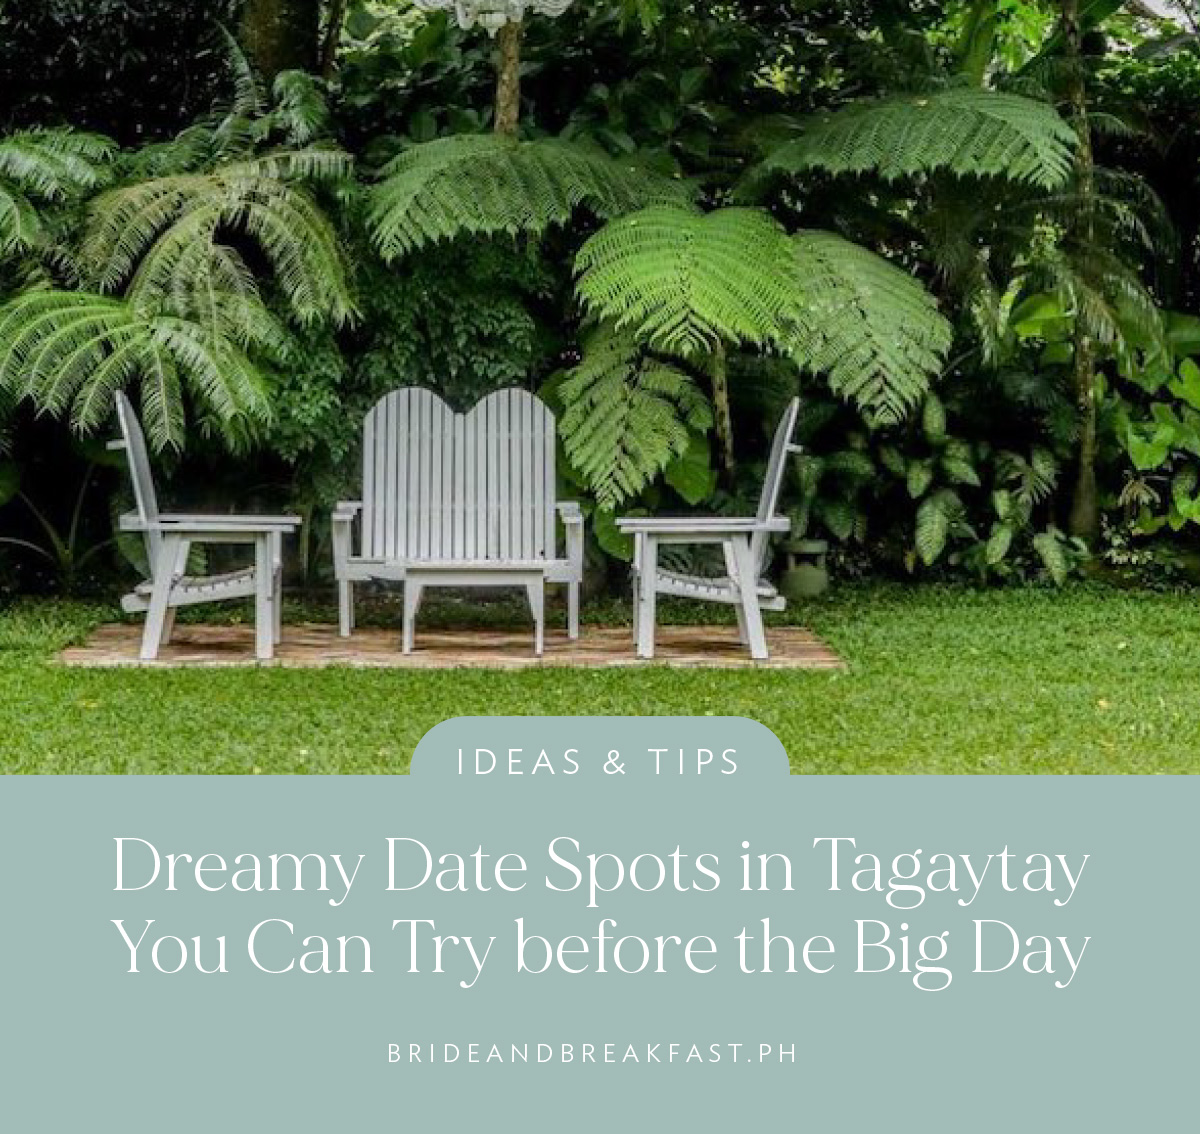 10 Dreamy Date Spots in Tagaytay You Can Try before the Big Day